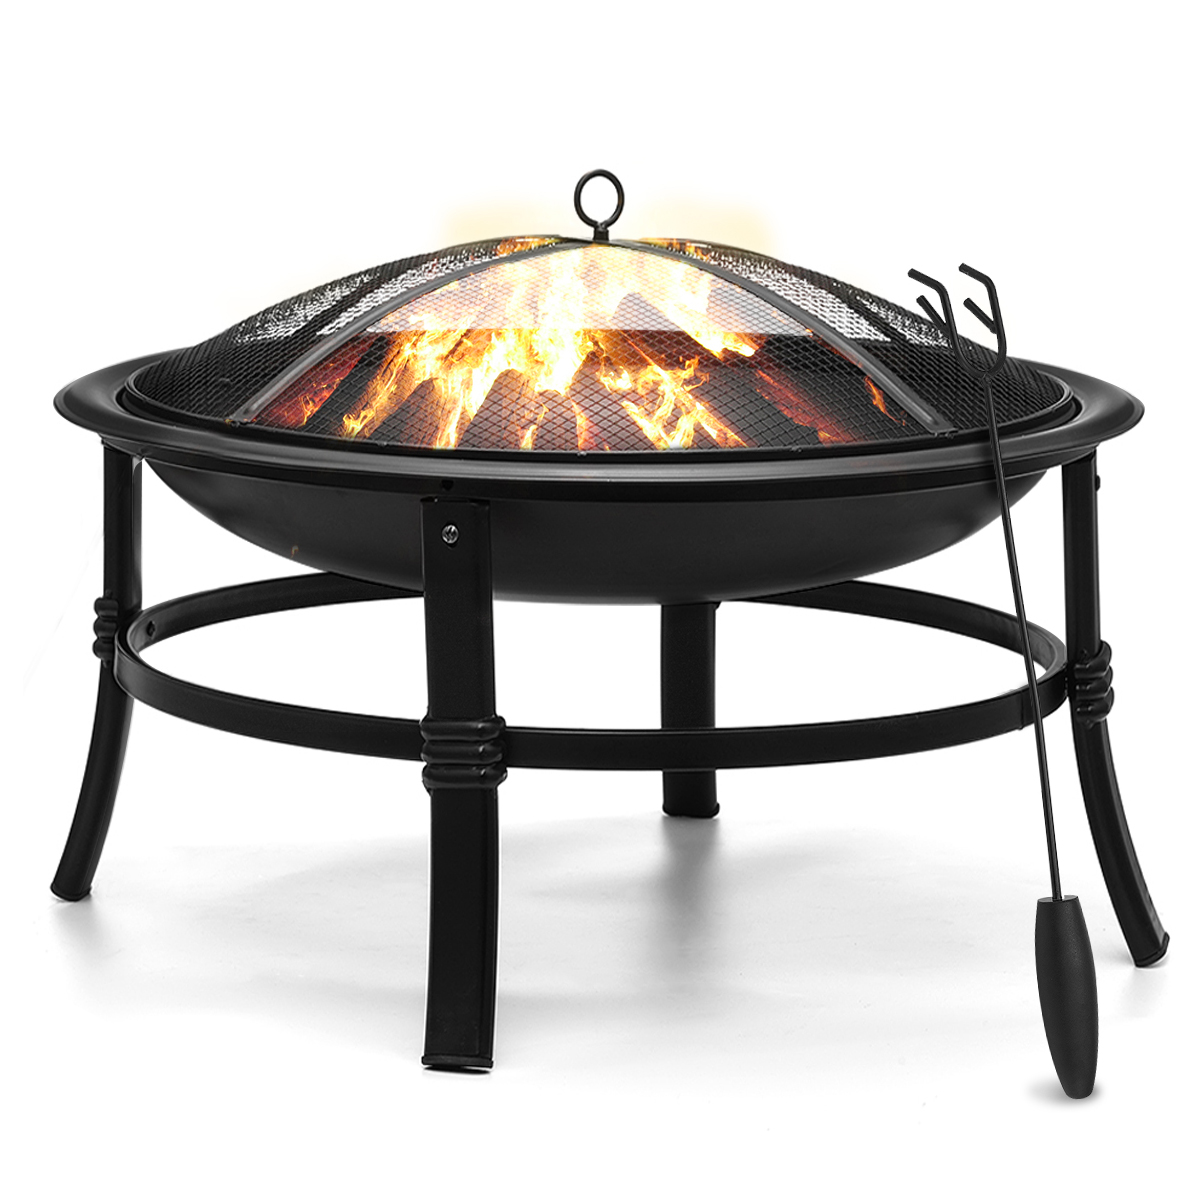 Kingso 26 Fire Pit Outdoor Patio Steel, What Size Grate For Fire Pit